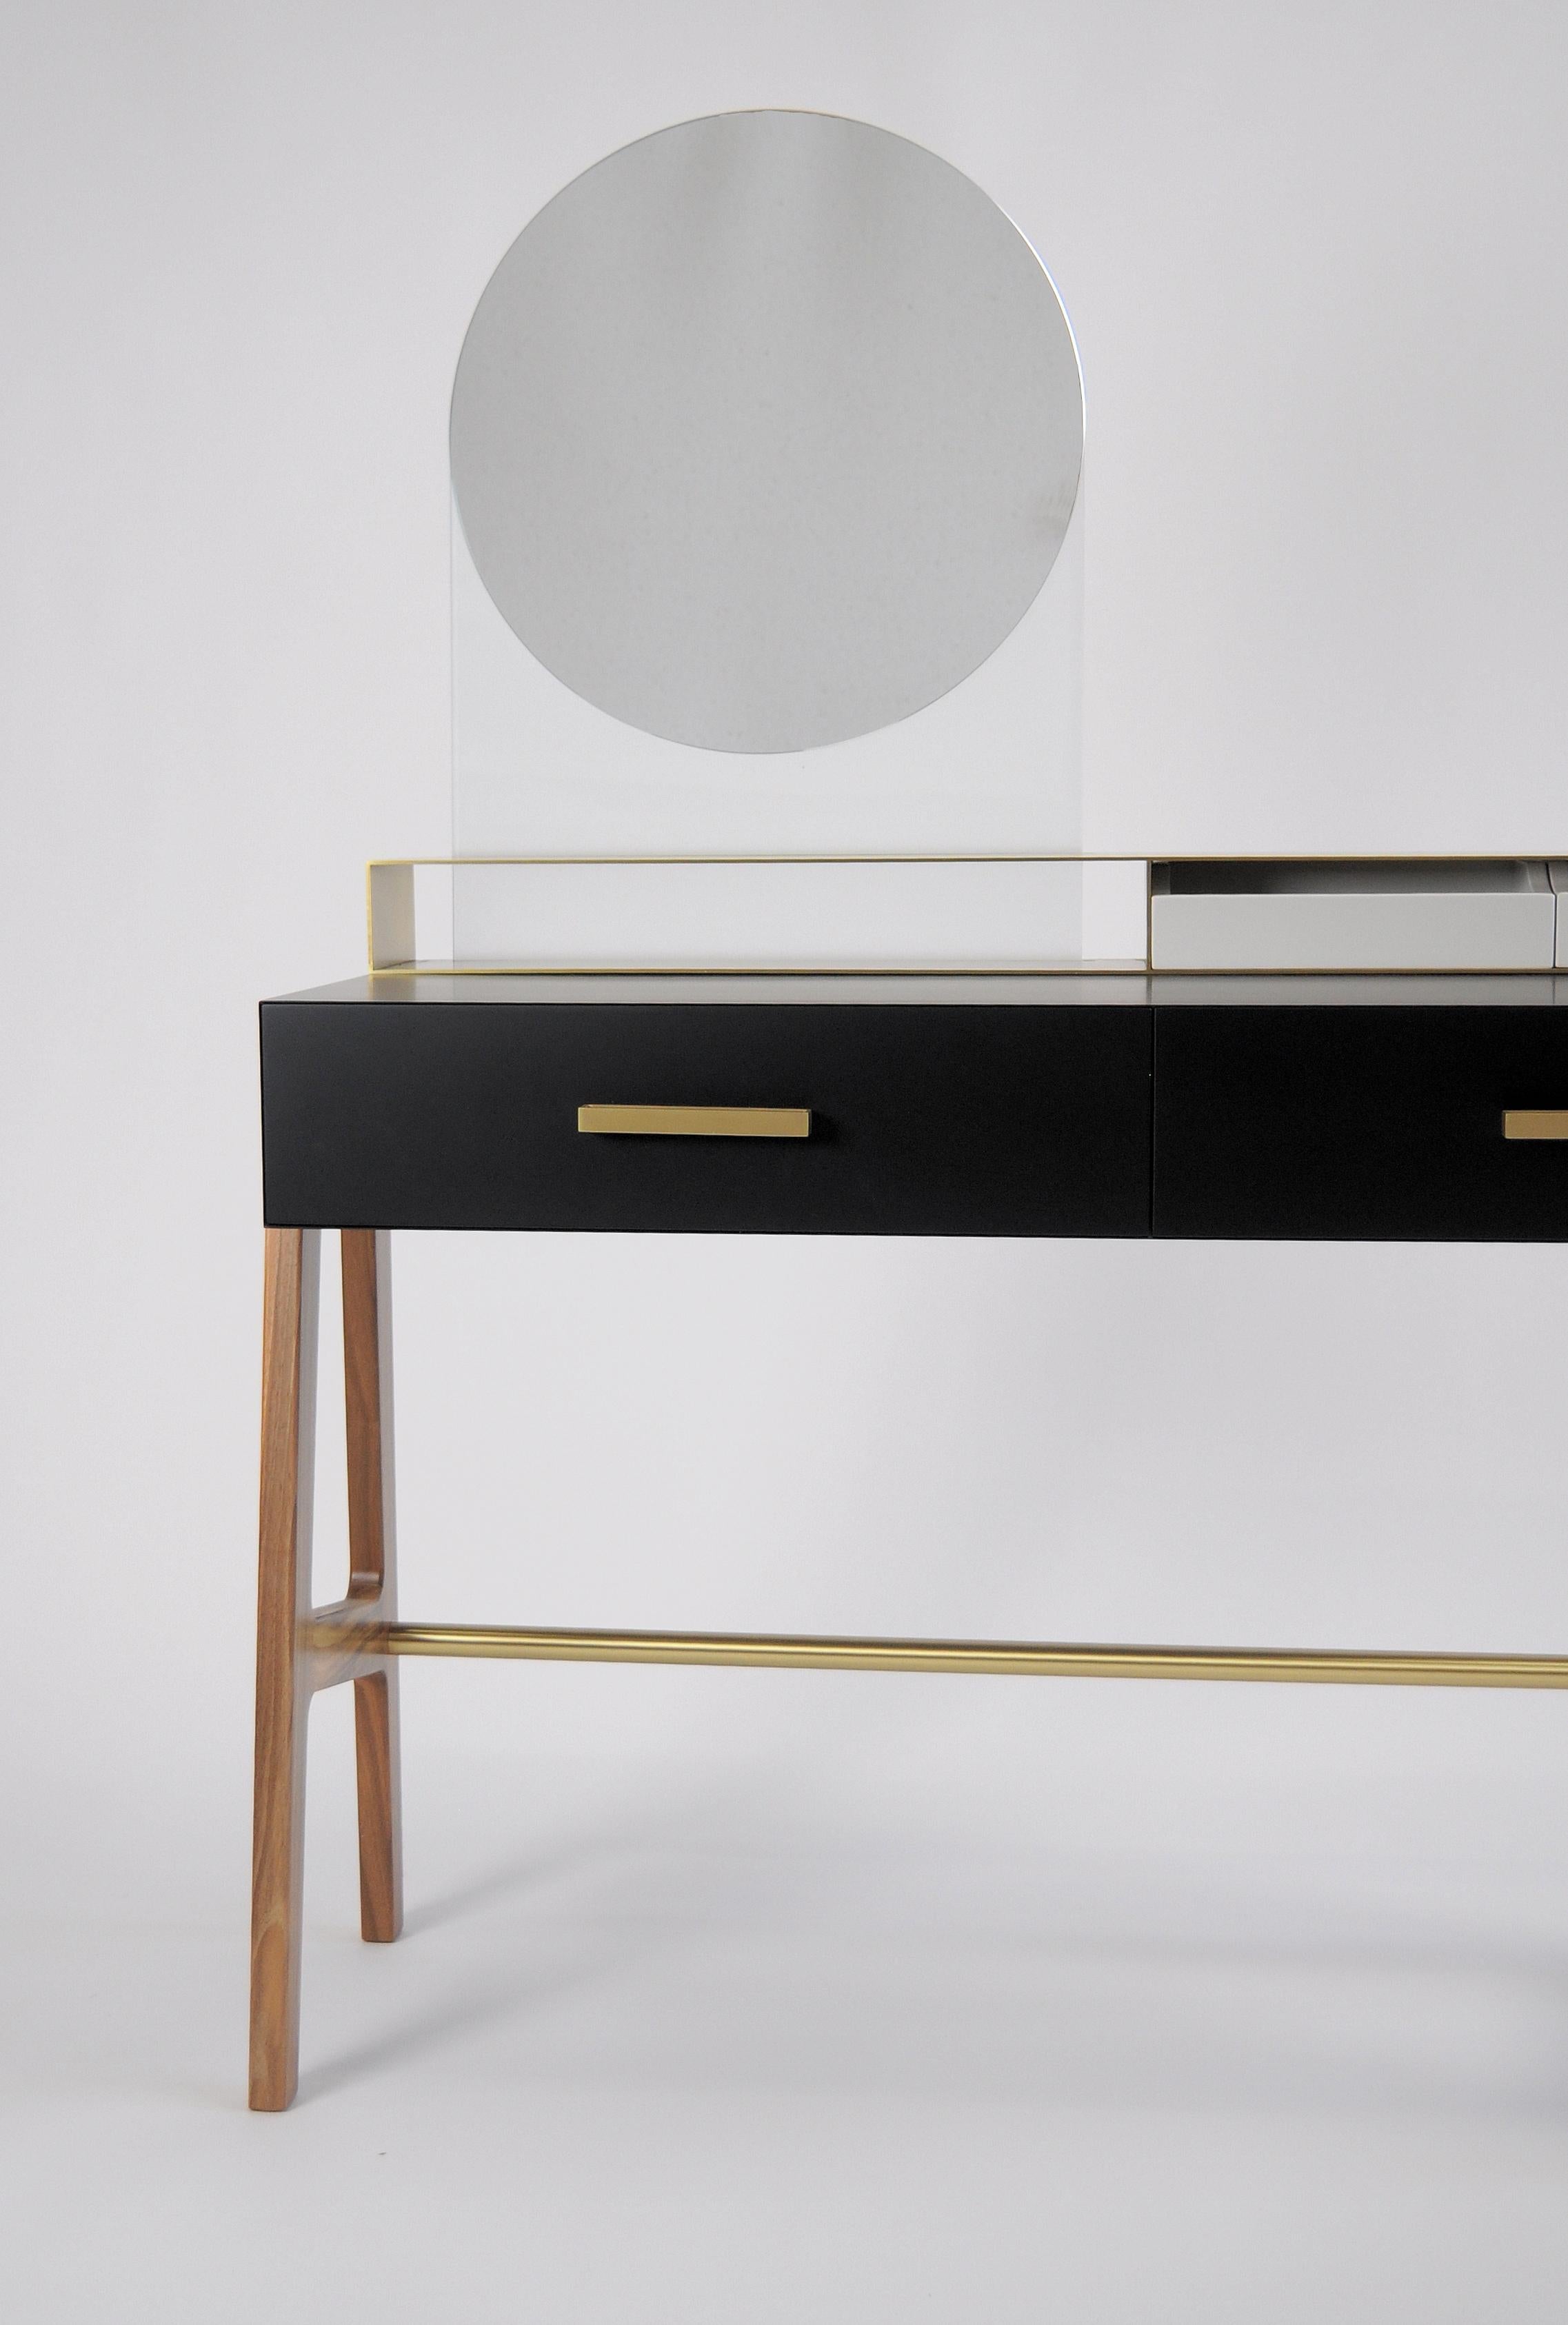 Vivian is a contemporary beauty desk, it can be used as make-up table, thanks to its light wall mirror, or as jewel case. It has simple lines and sophisticated details. A brass box contains the drawers for jewelry. Vivian is an elegant and precious